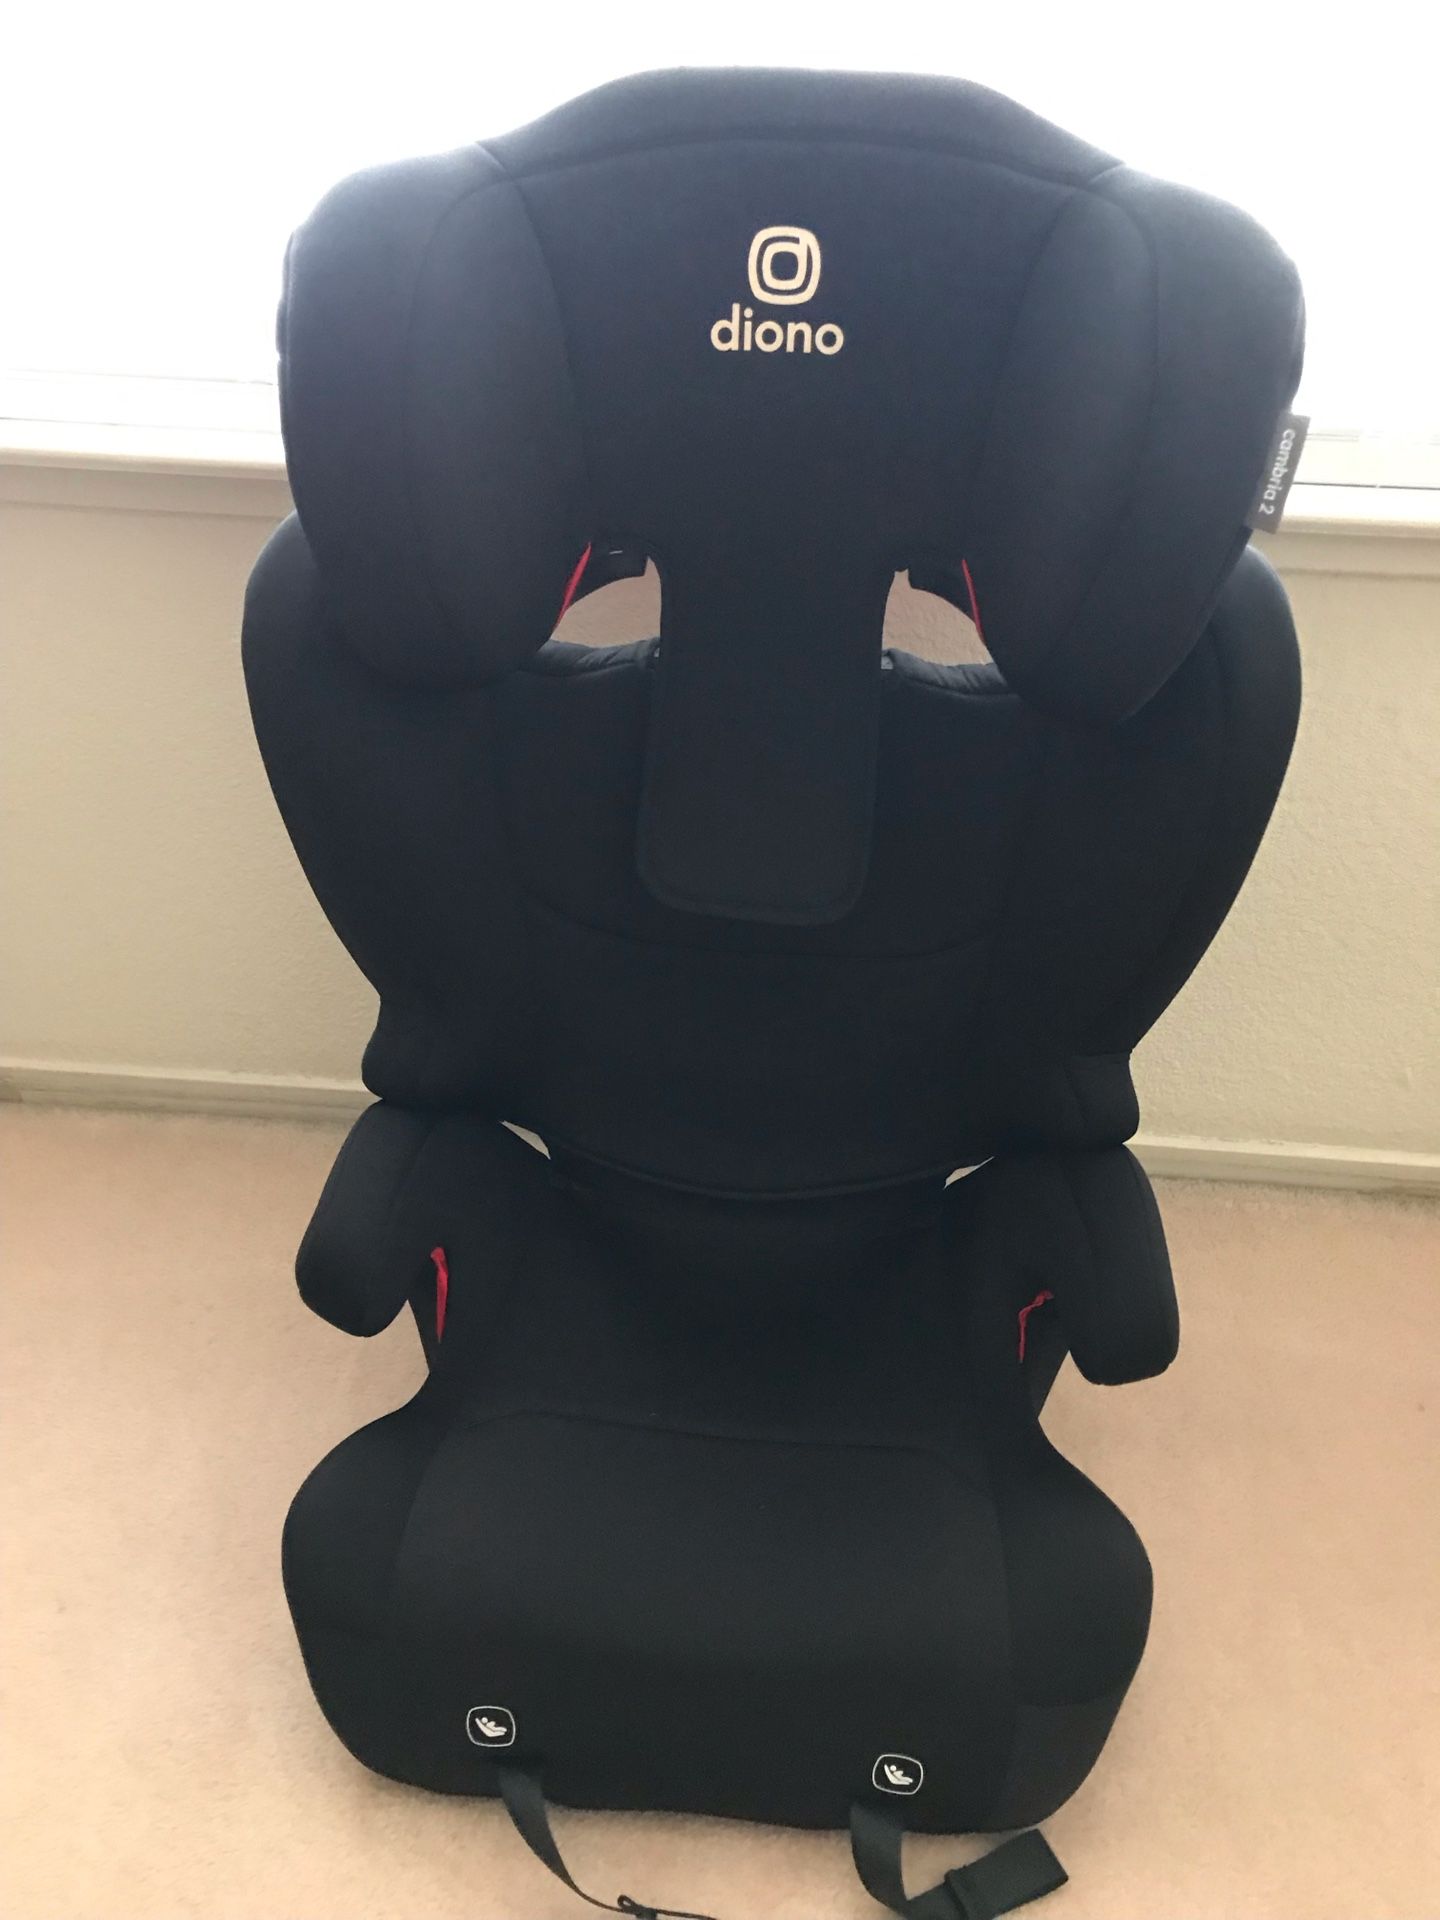 Diono Booster Seat $50